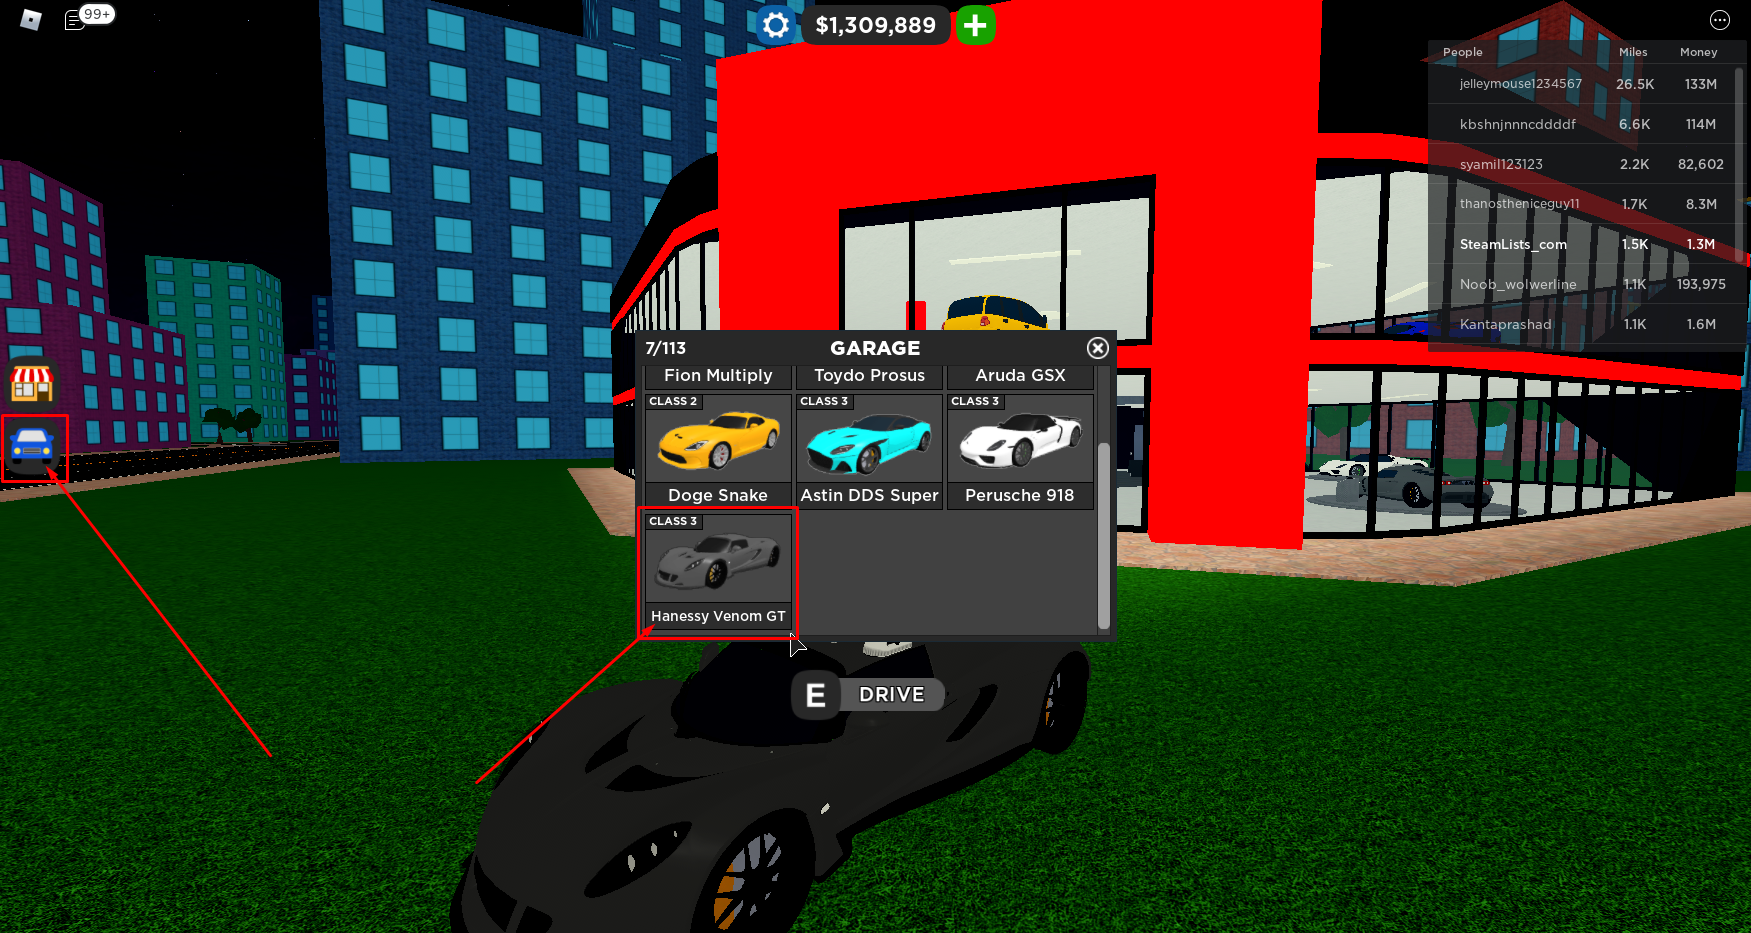 Roblox – Car Dealership Tycoon How to Spawn and Drive a Car? 1 - steamlists.com